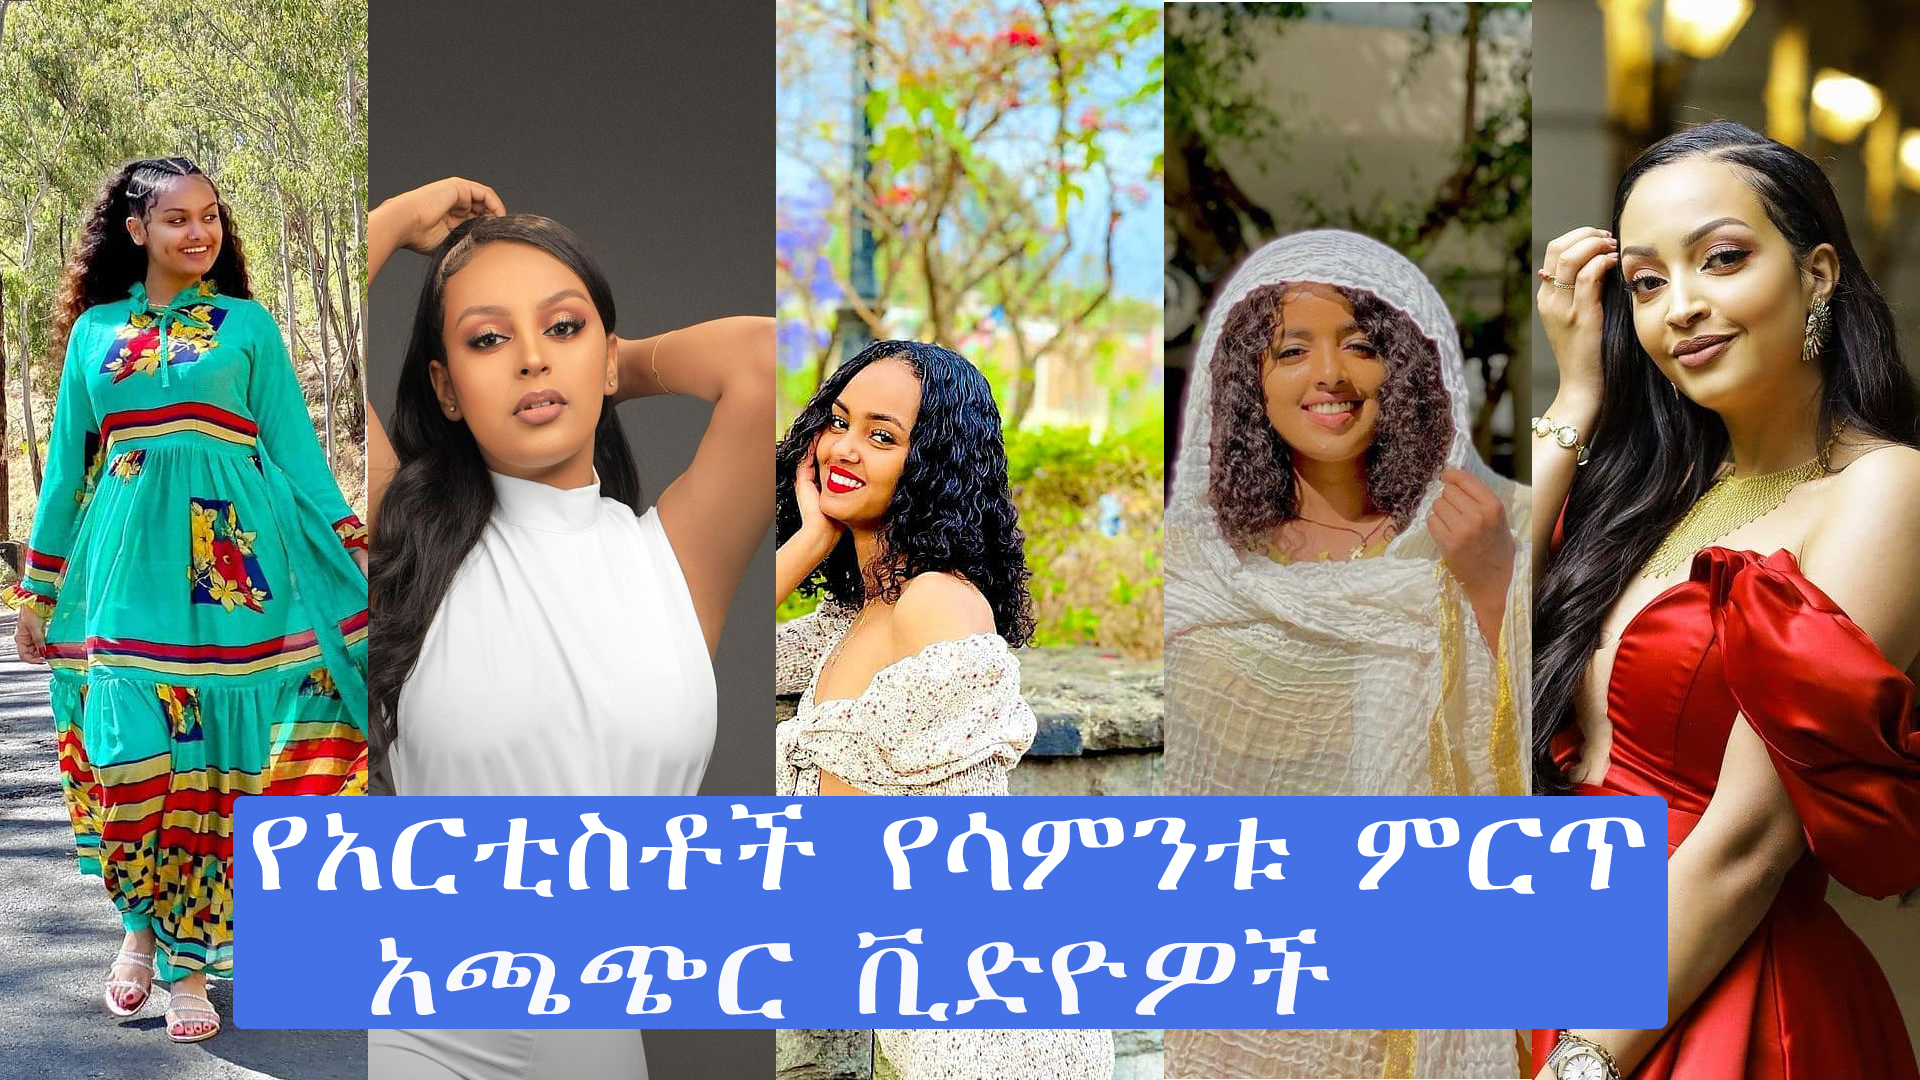 ethiopian famous person biography in amharic